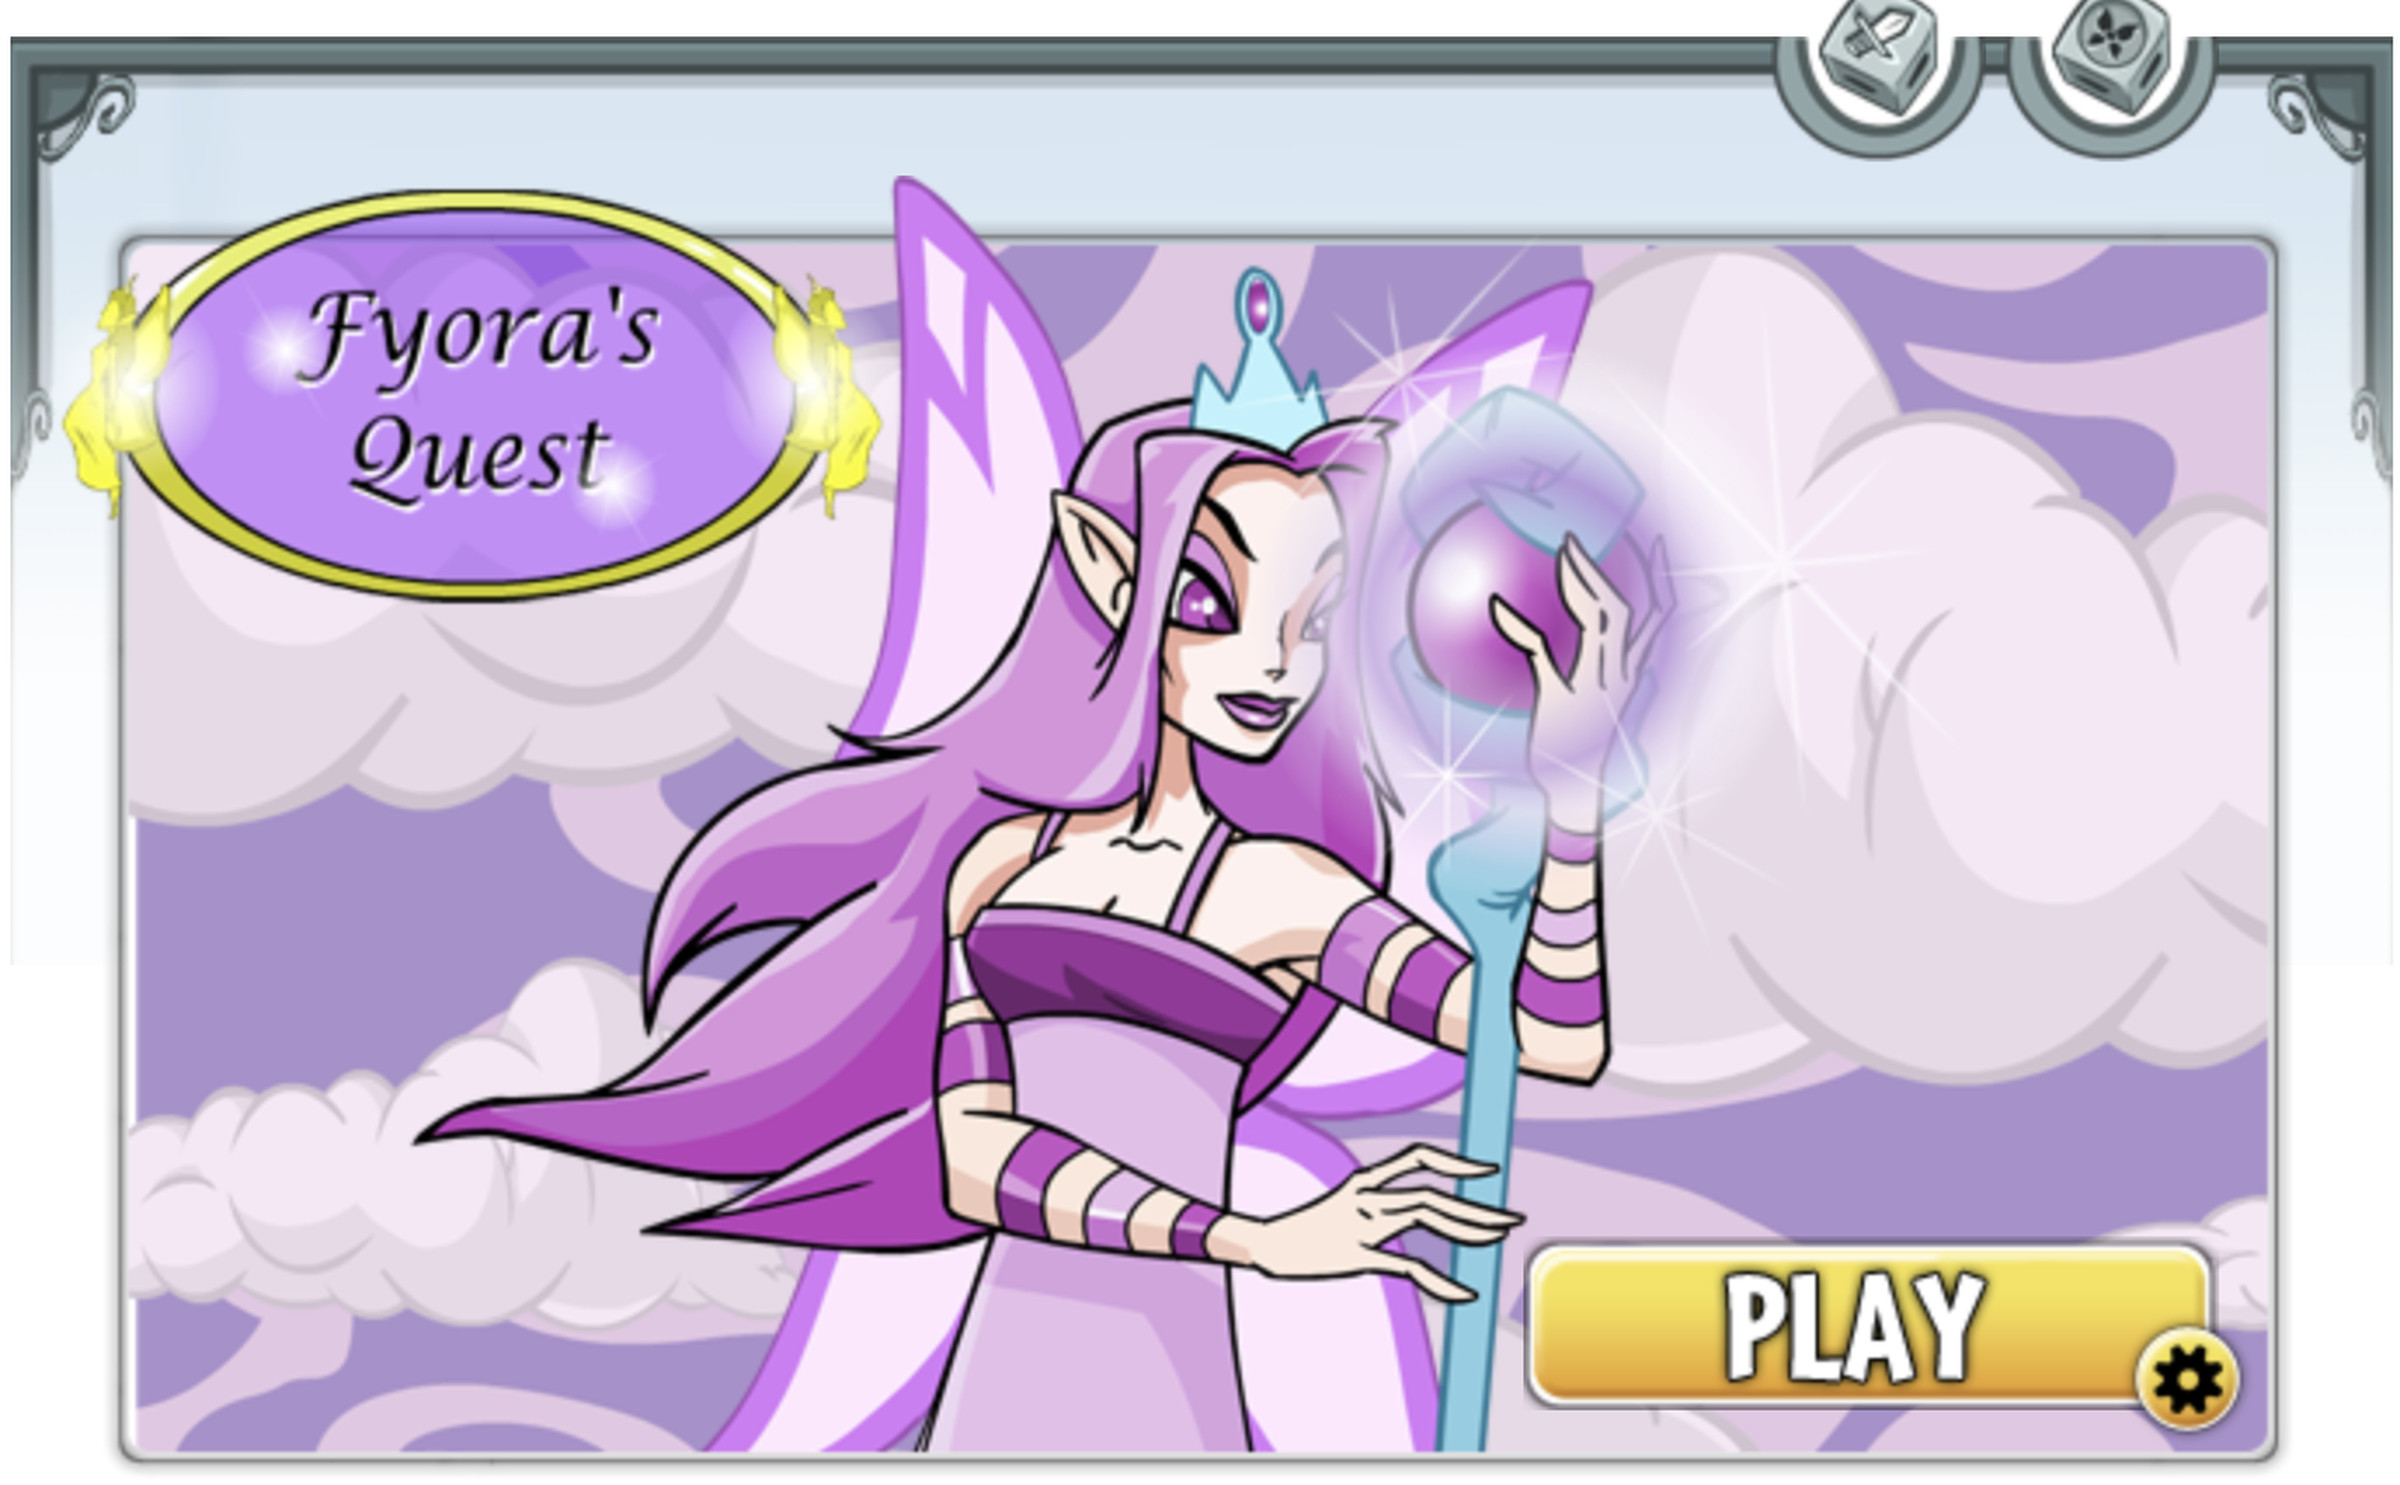 Screenshot from neopets.com featuring the start screen for the browser game Faerie Caves II.